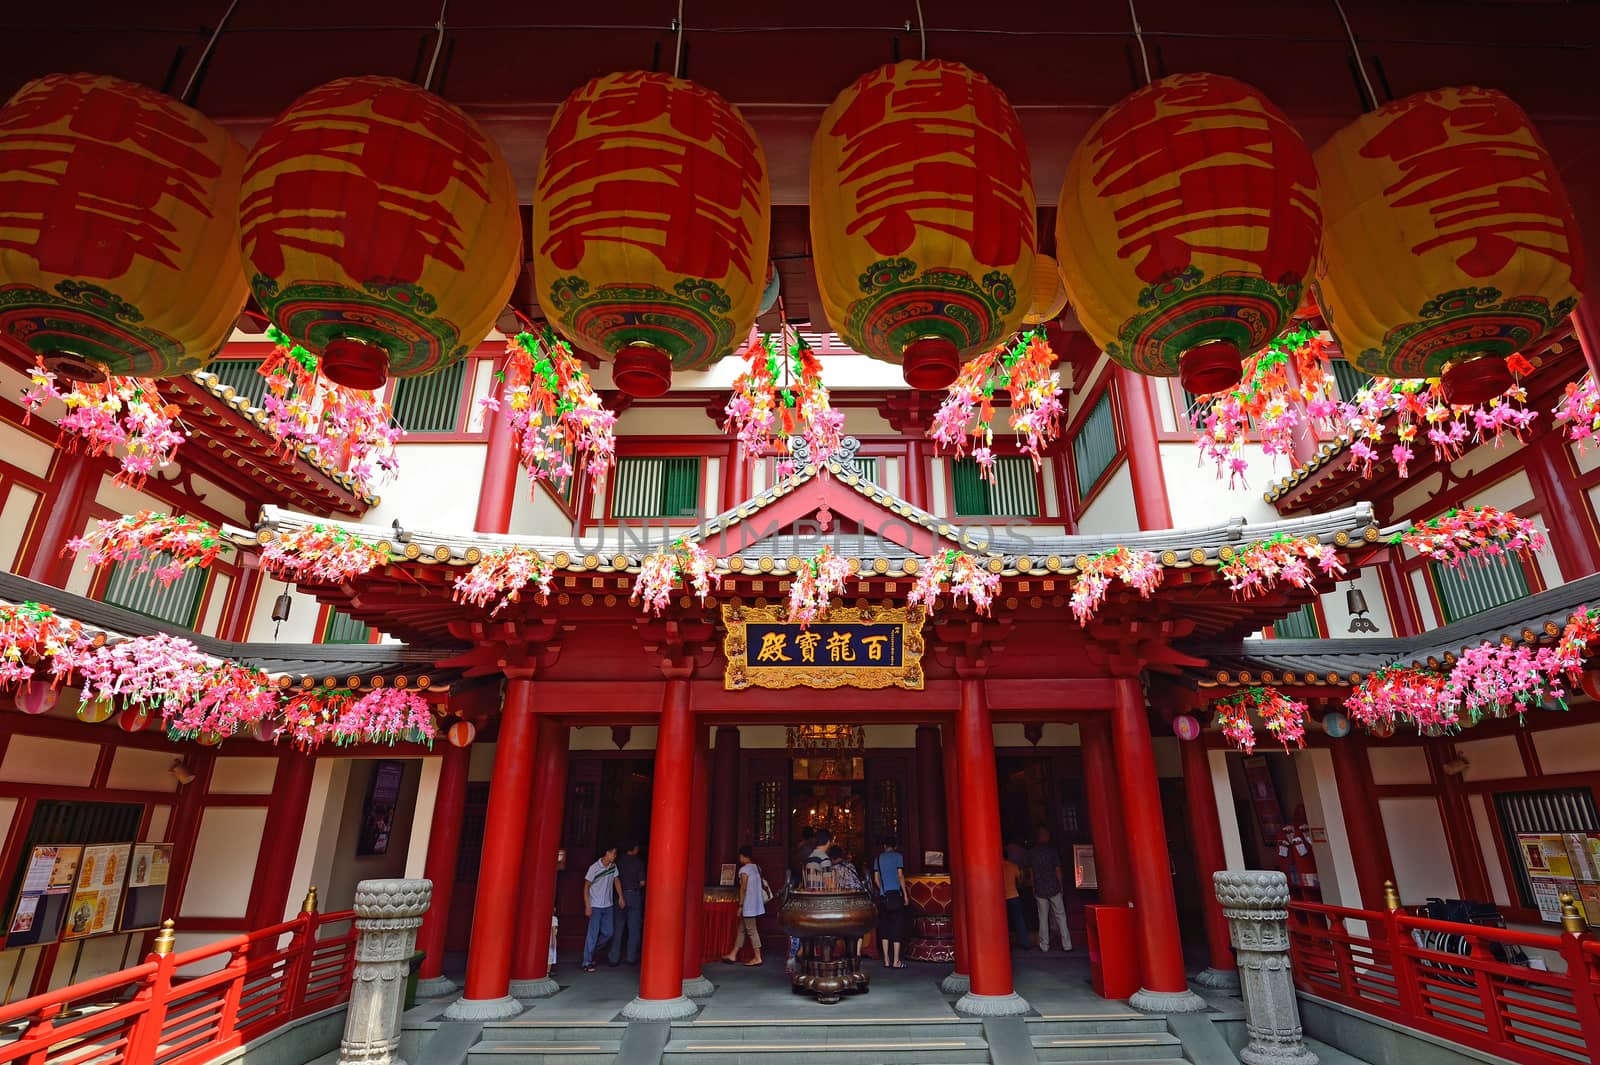 Buddha Tooth Relic Temple in China Town Singapore by think4photop